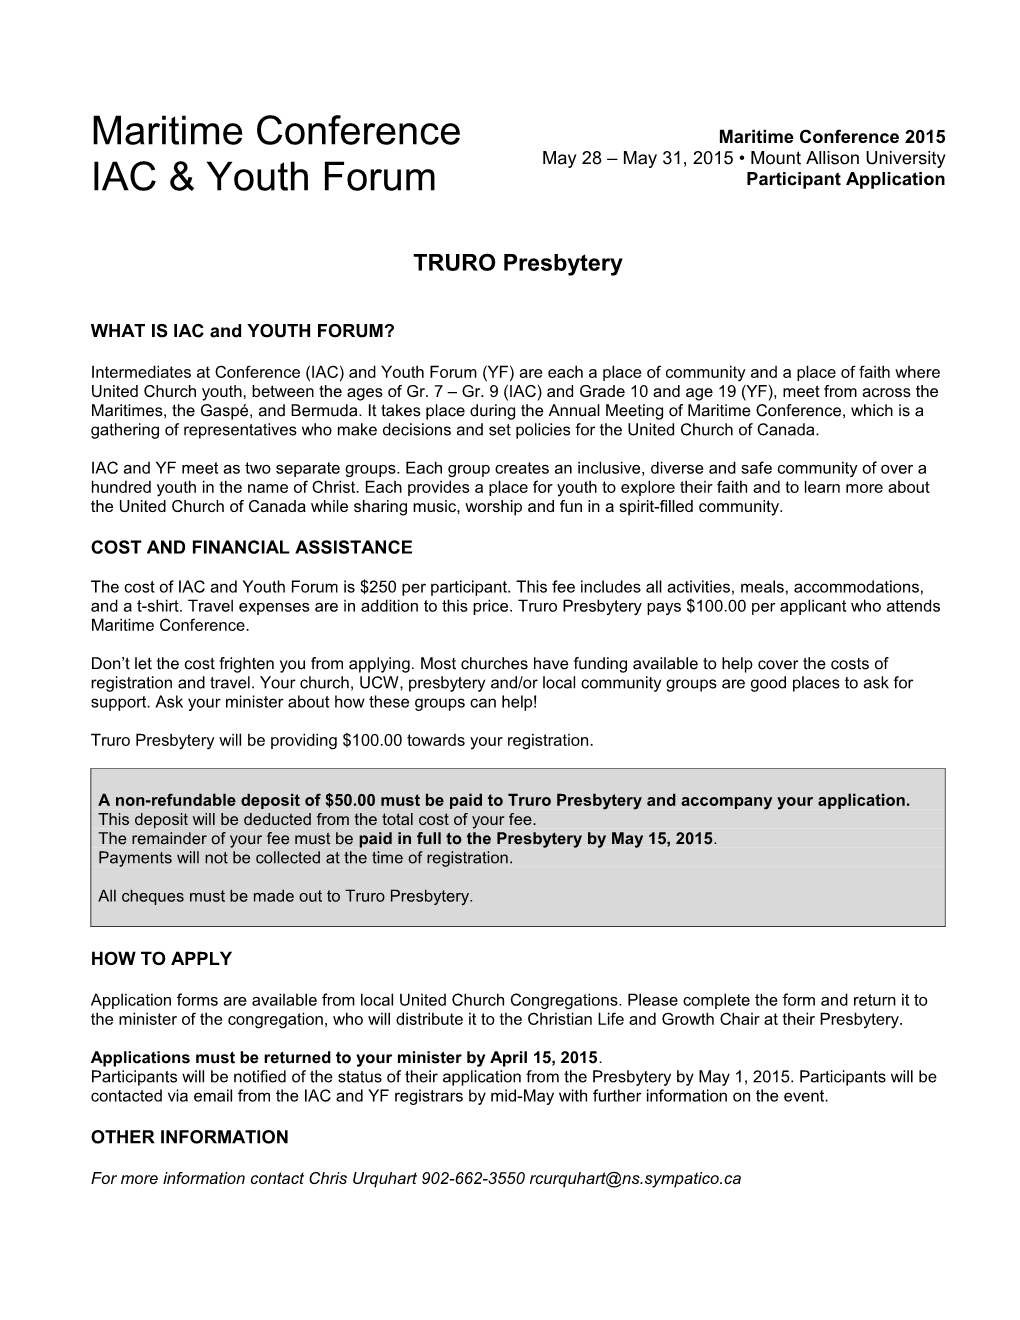 WHAT IS IAC and YOUTH FORUM?